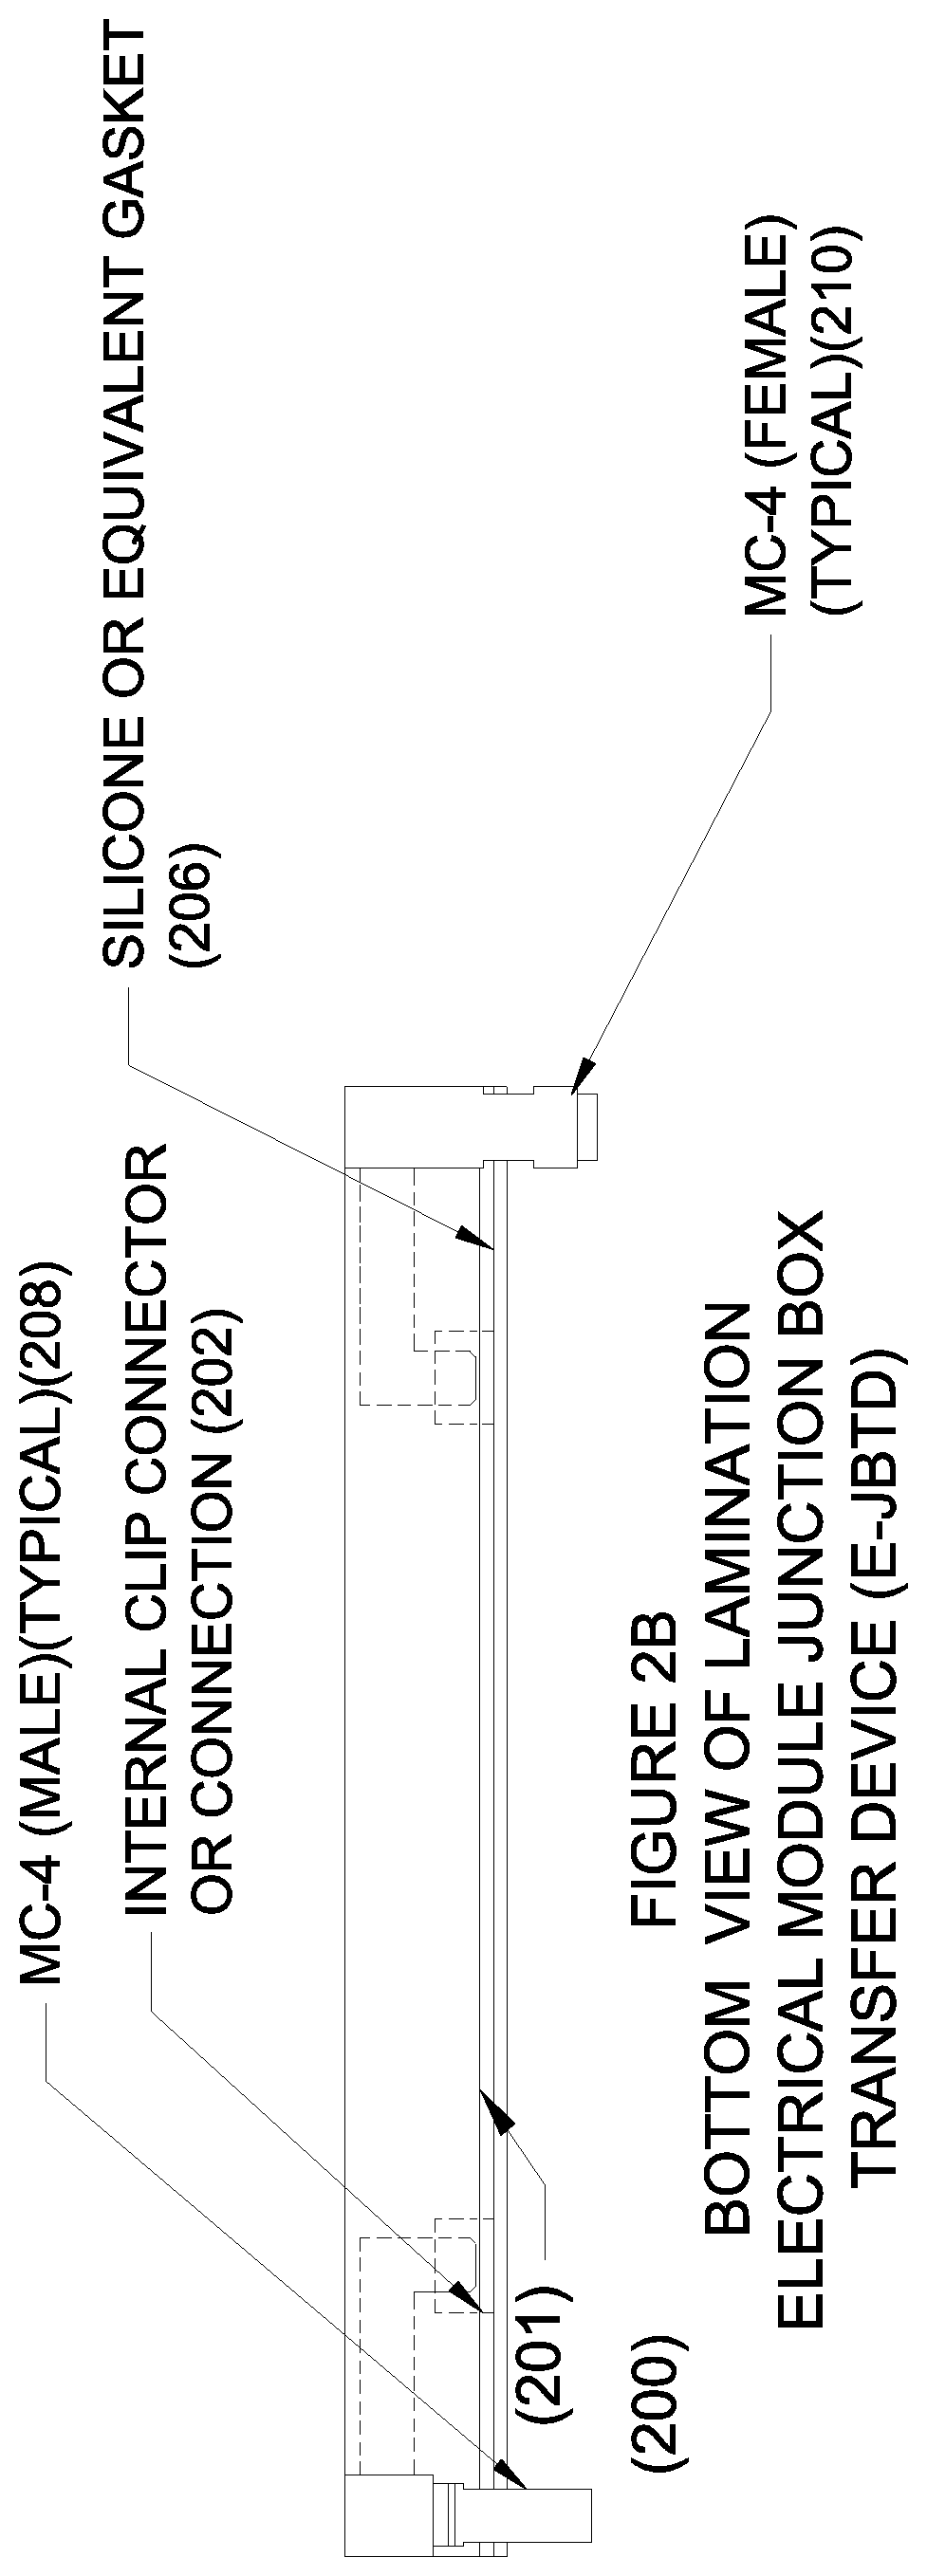 Electrical module junction box transfer device (e-jbtd) system having electrical energy internal and external connections